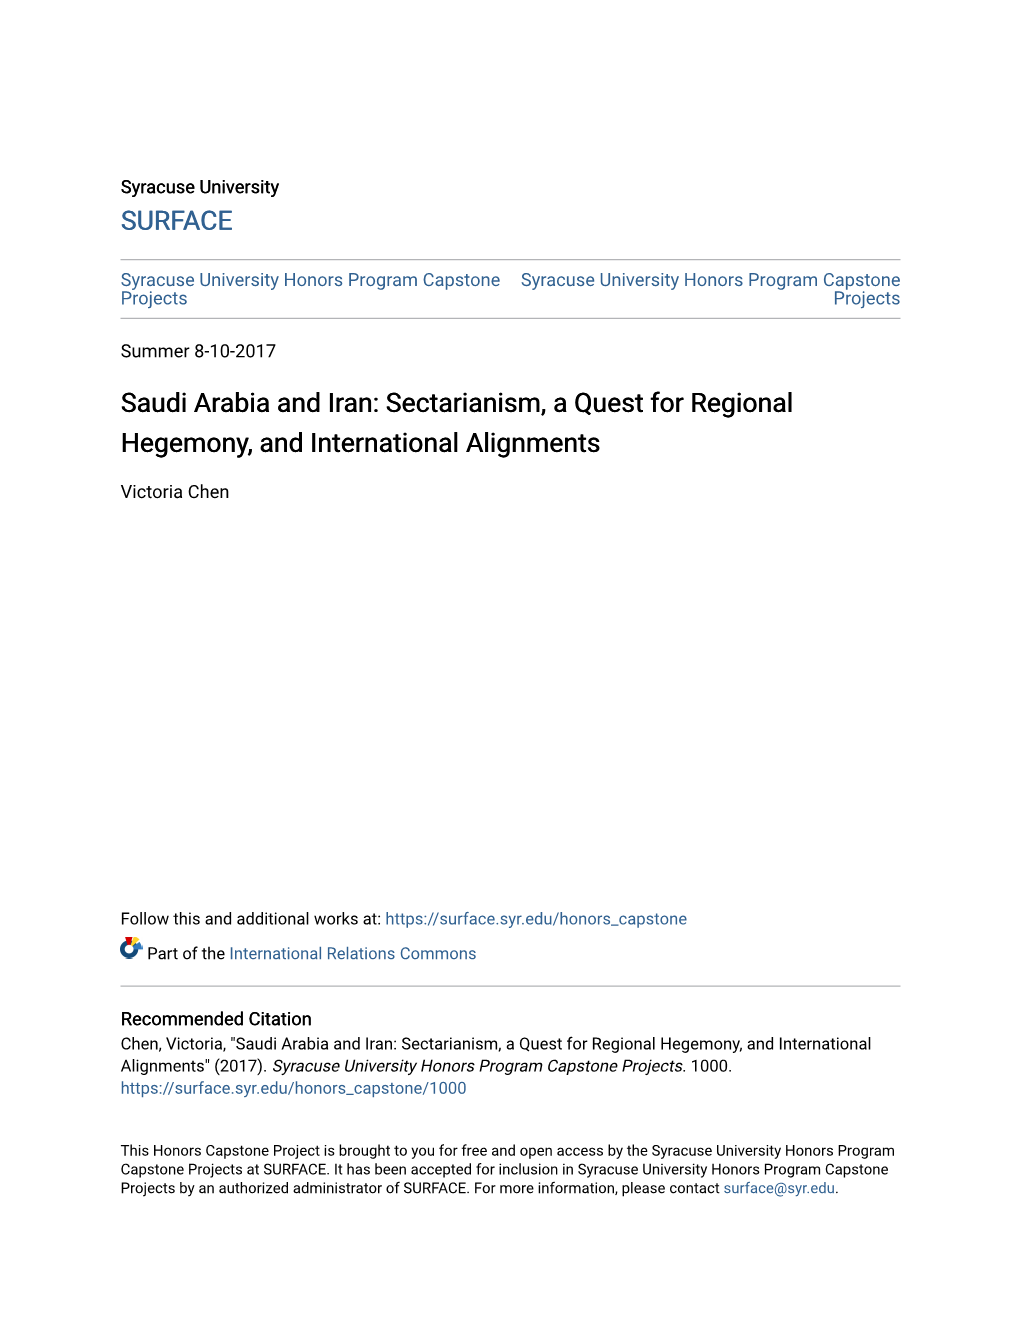 Saudi Arabia and Iran: Sectarianism, a Quest for Regional Hegemony, and International Alignments